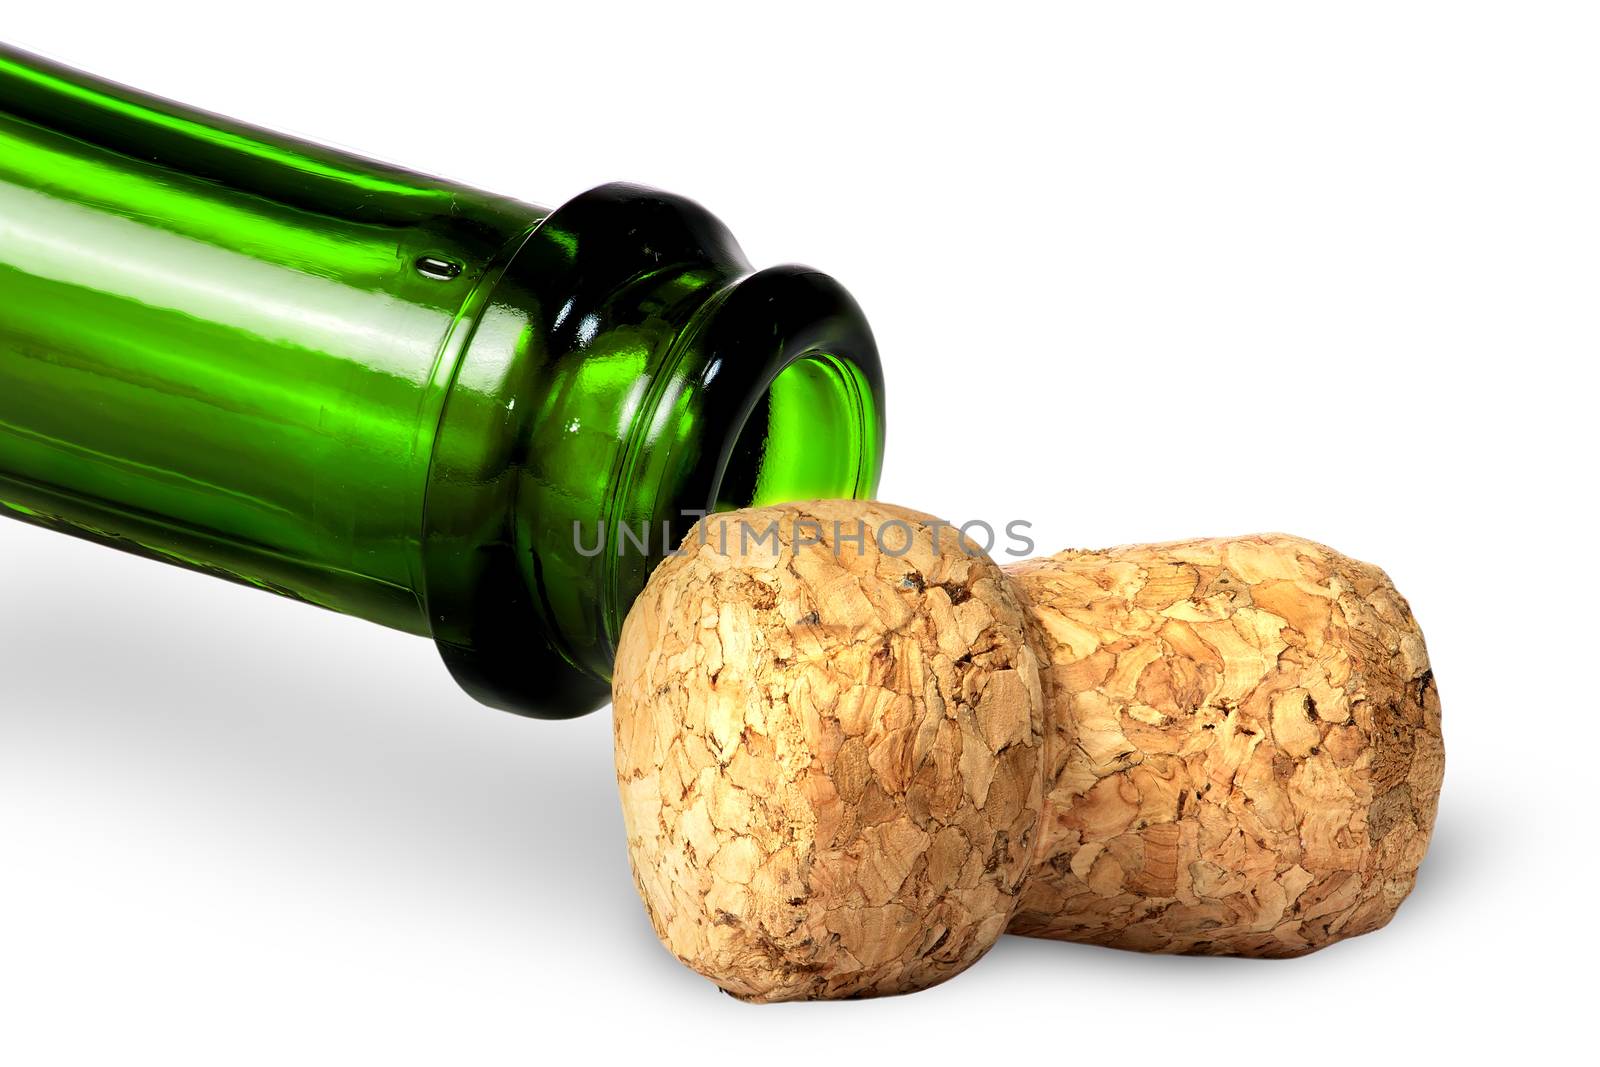 Neck of green bottle and cork near isolated on white background